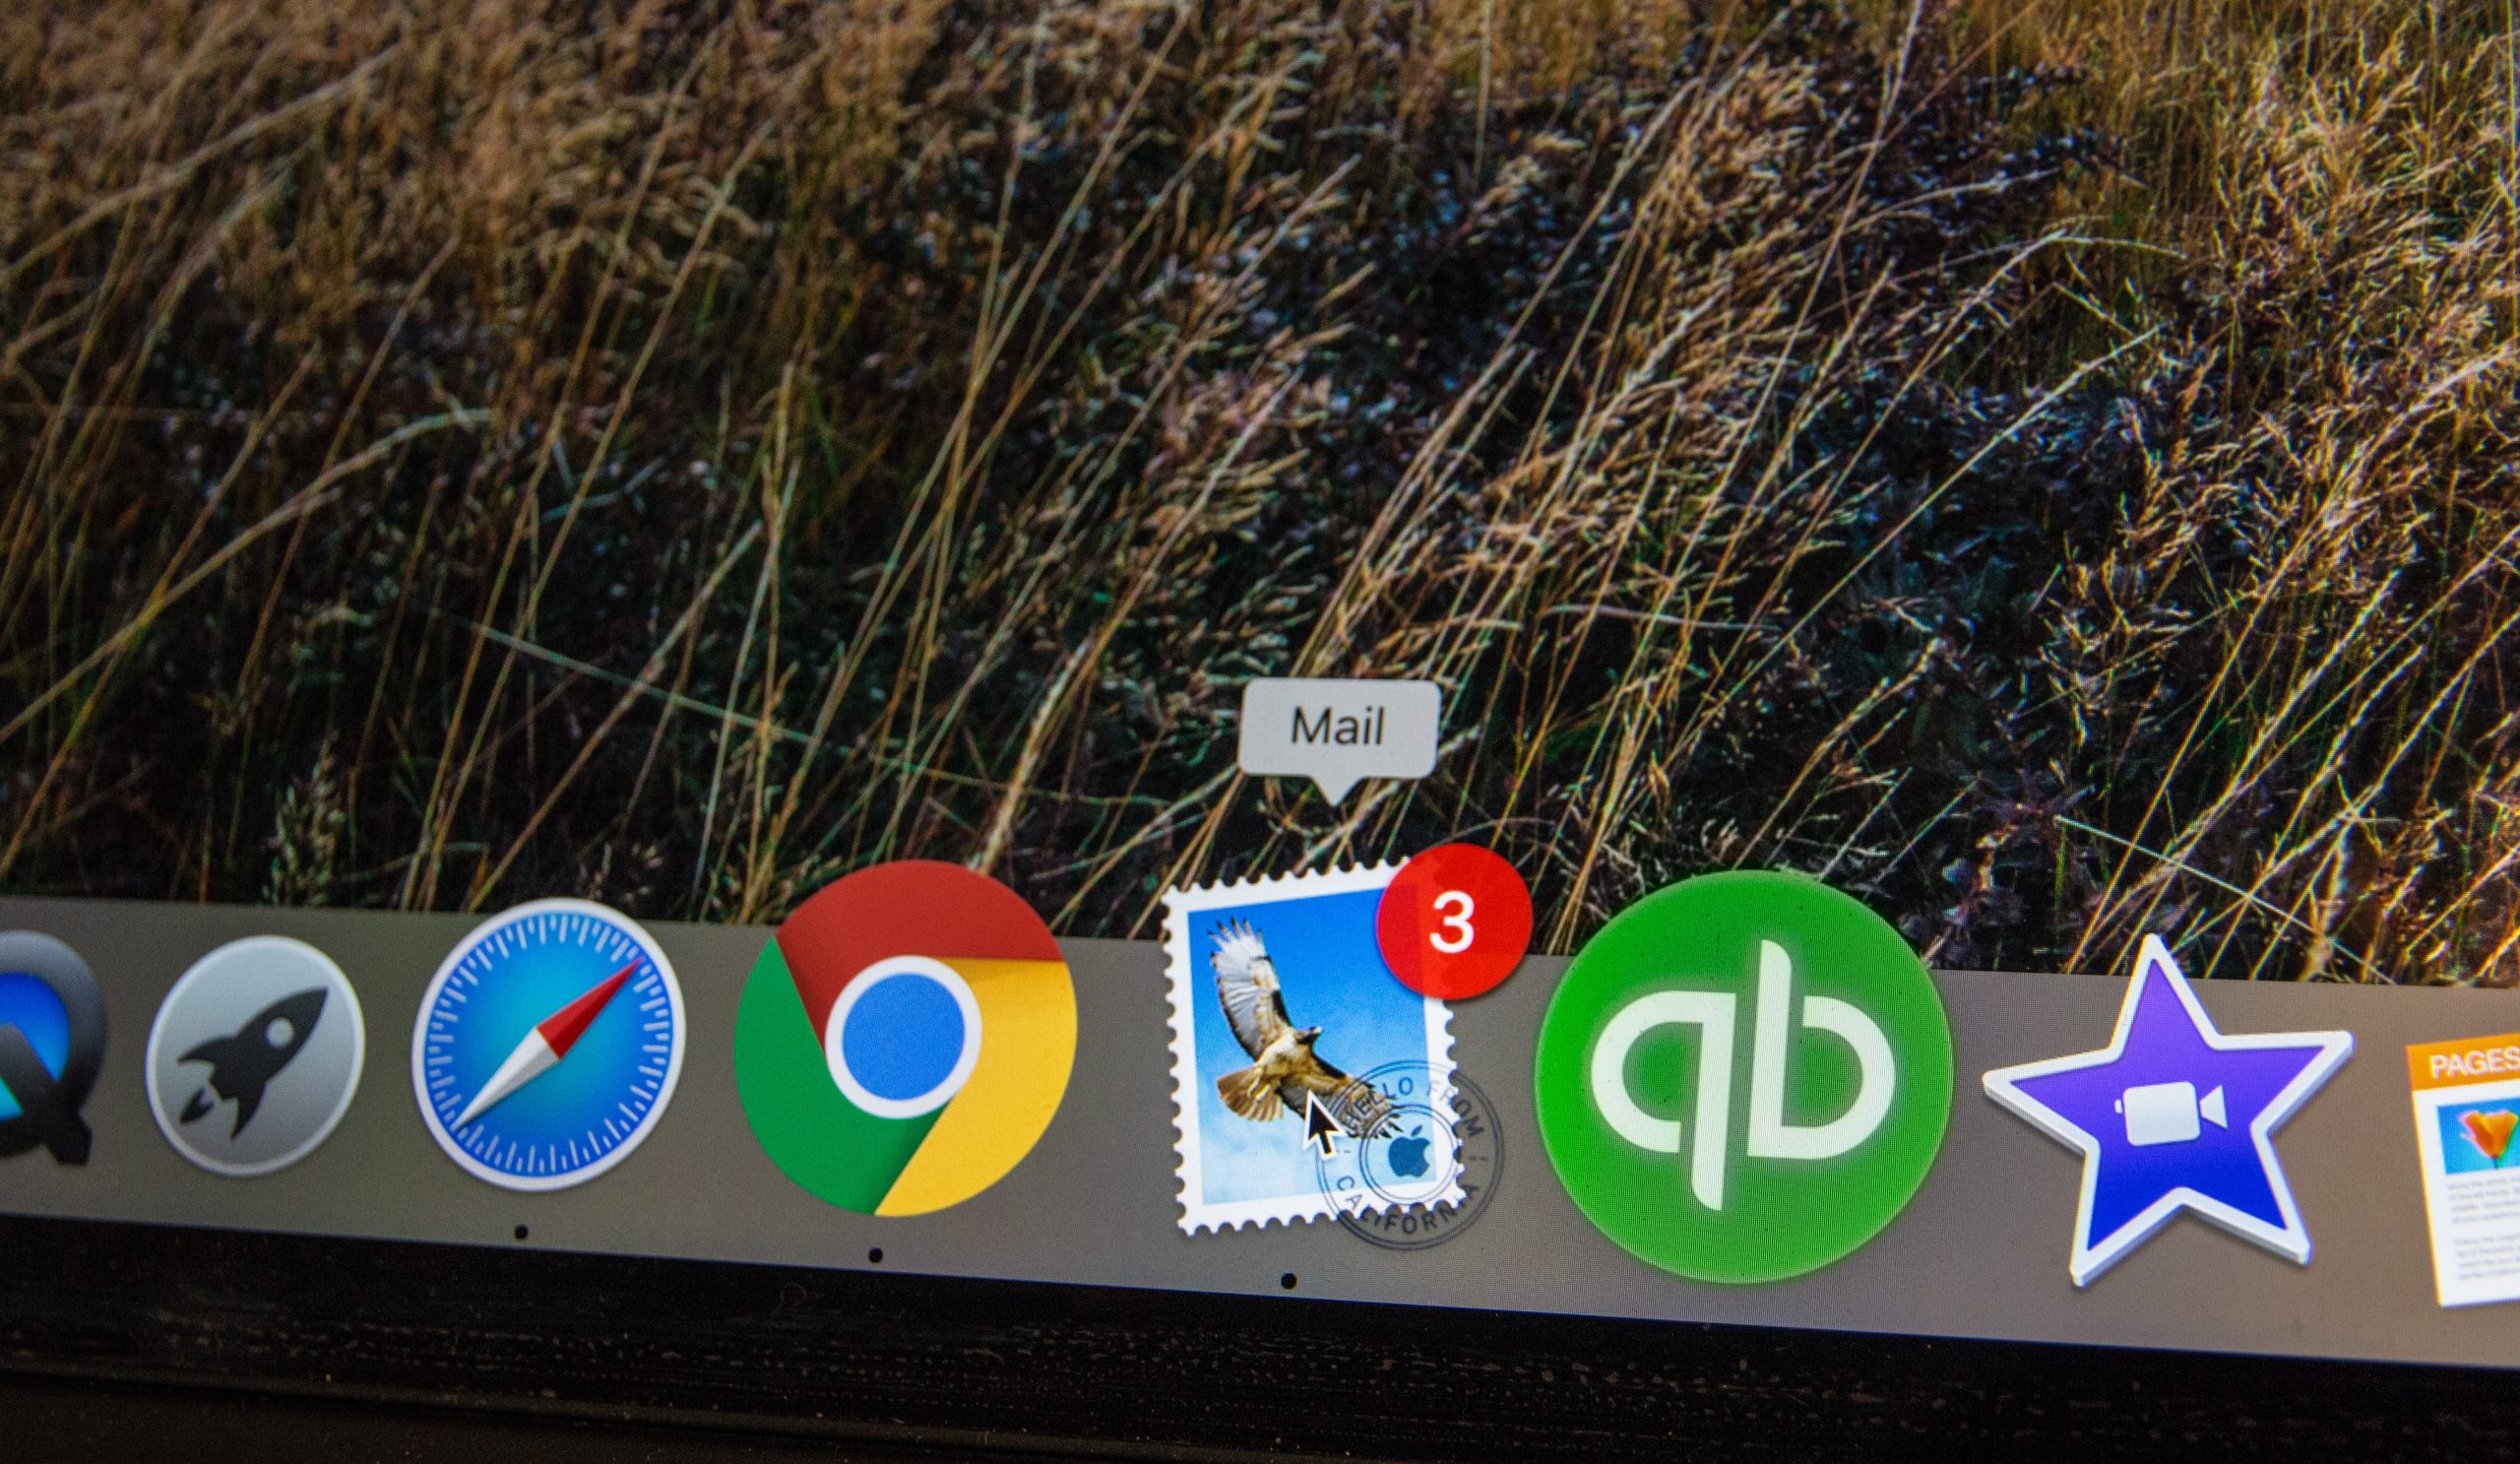 Image of a macbook monitor with the Mail app icon